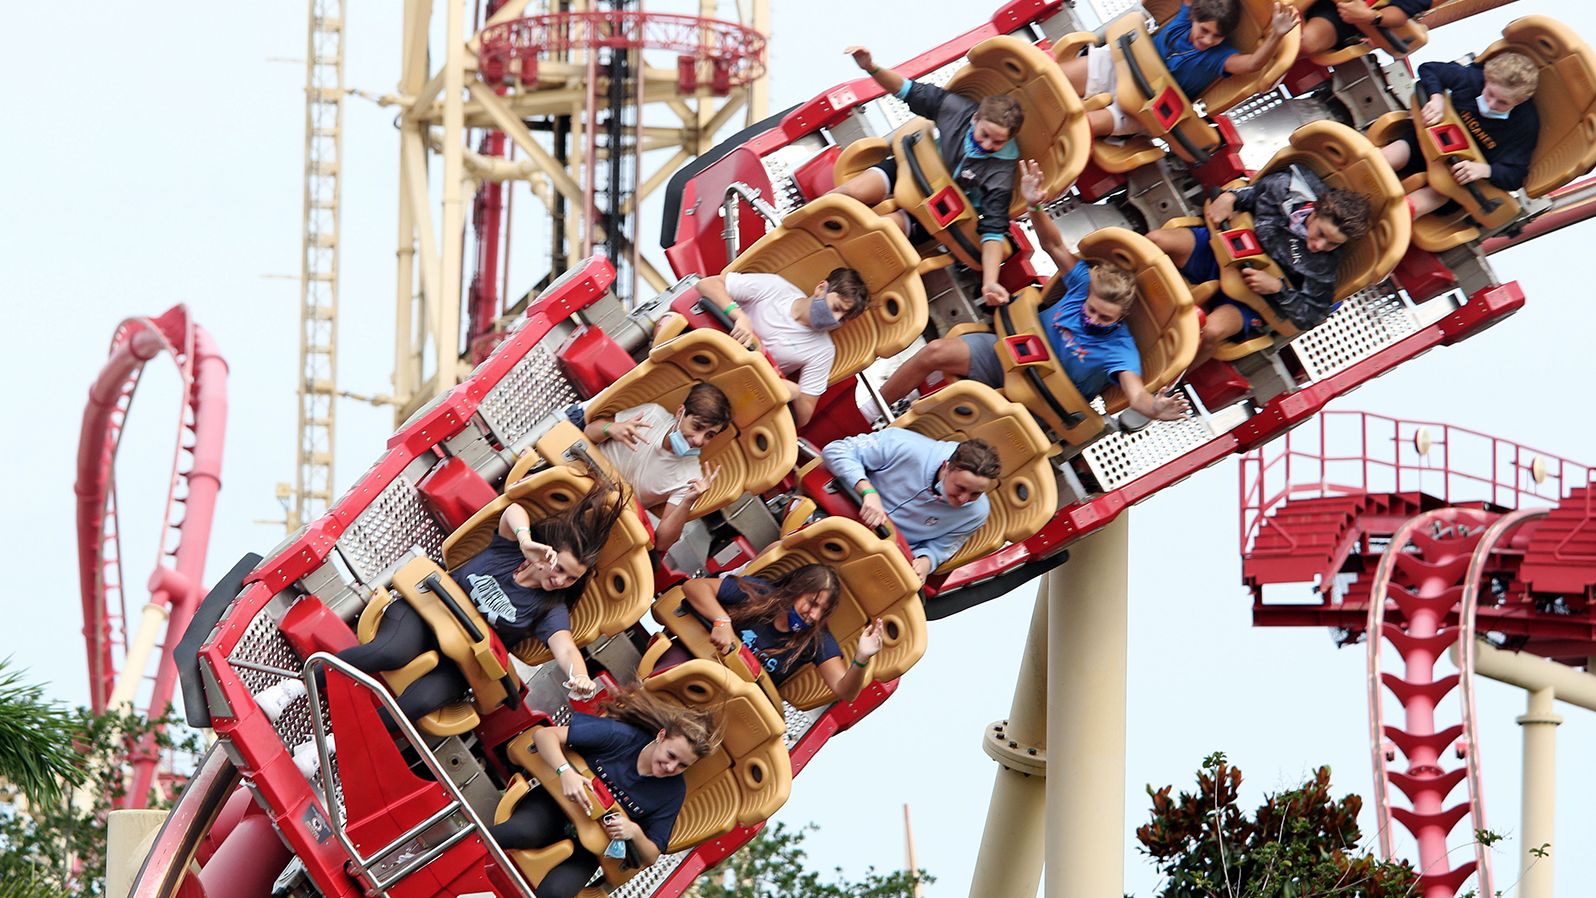 Visitors ride a roller coaster at the Universal Studios theme park in Orlando after it reopened on June 5.